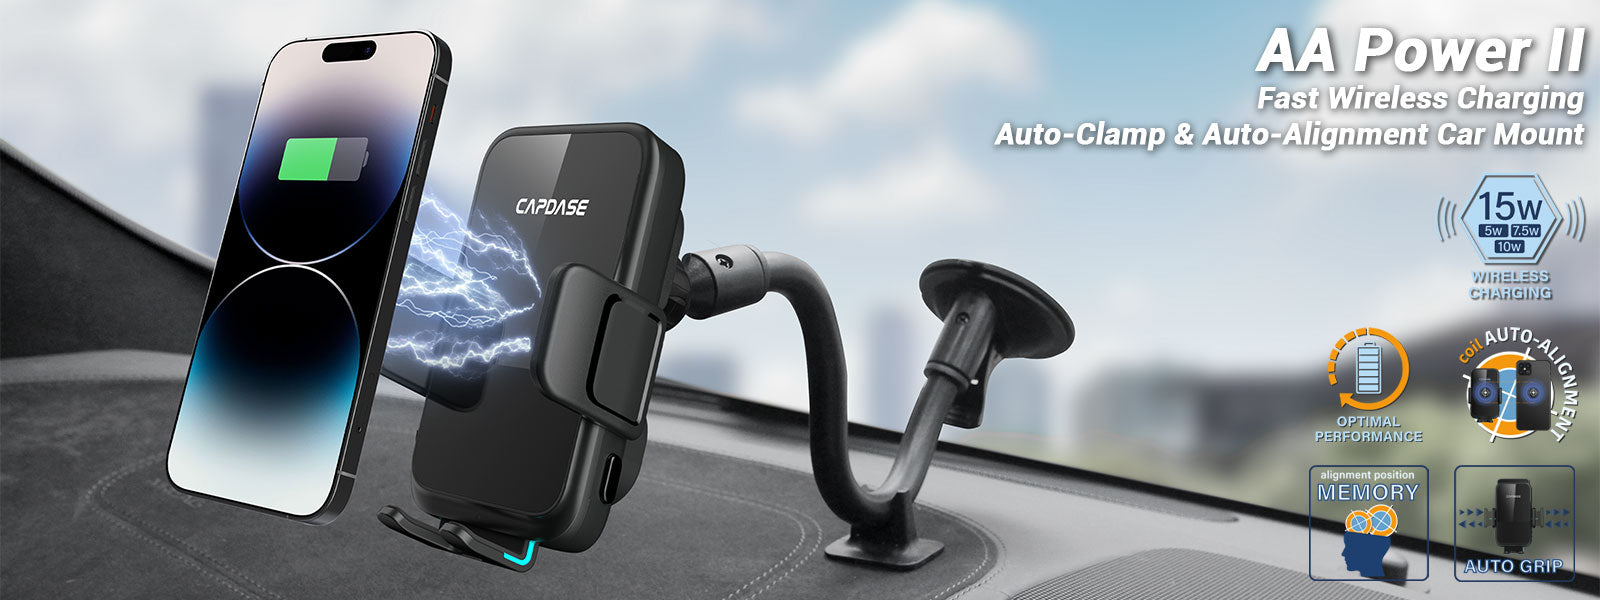 AA Power II Fast Wireless Charging Auto-Clamp & Auto-Alignment Car Mount